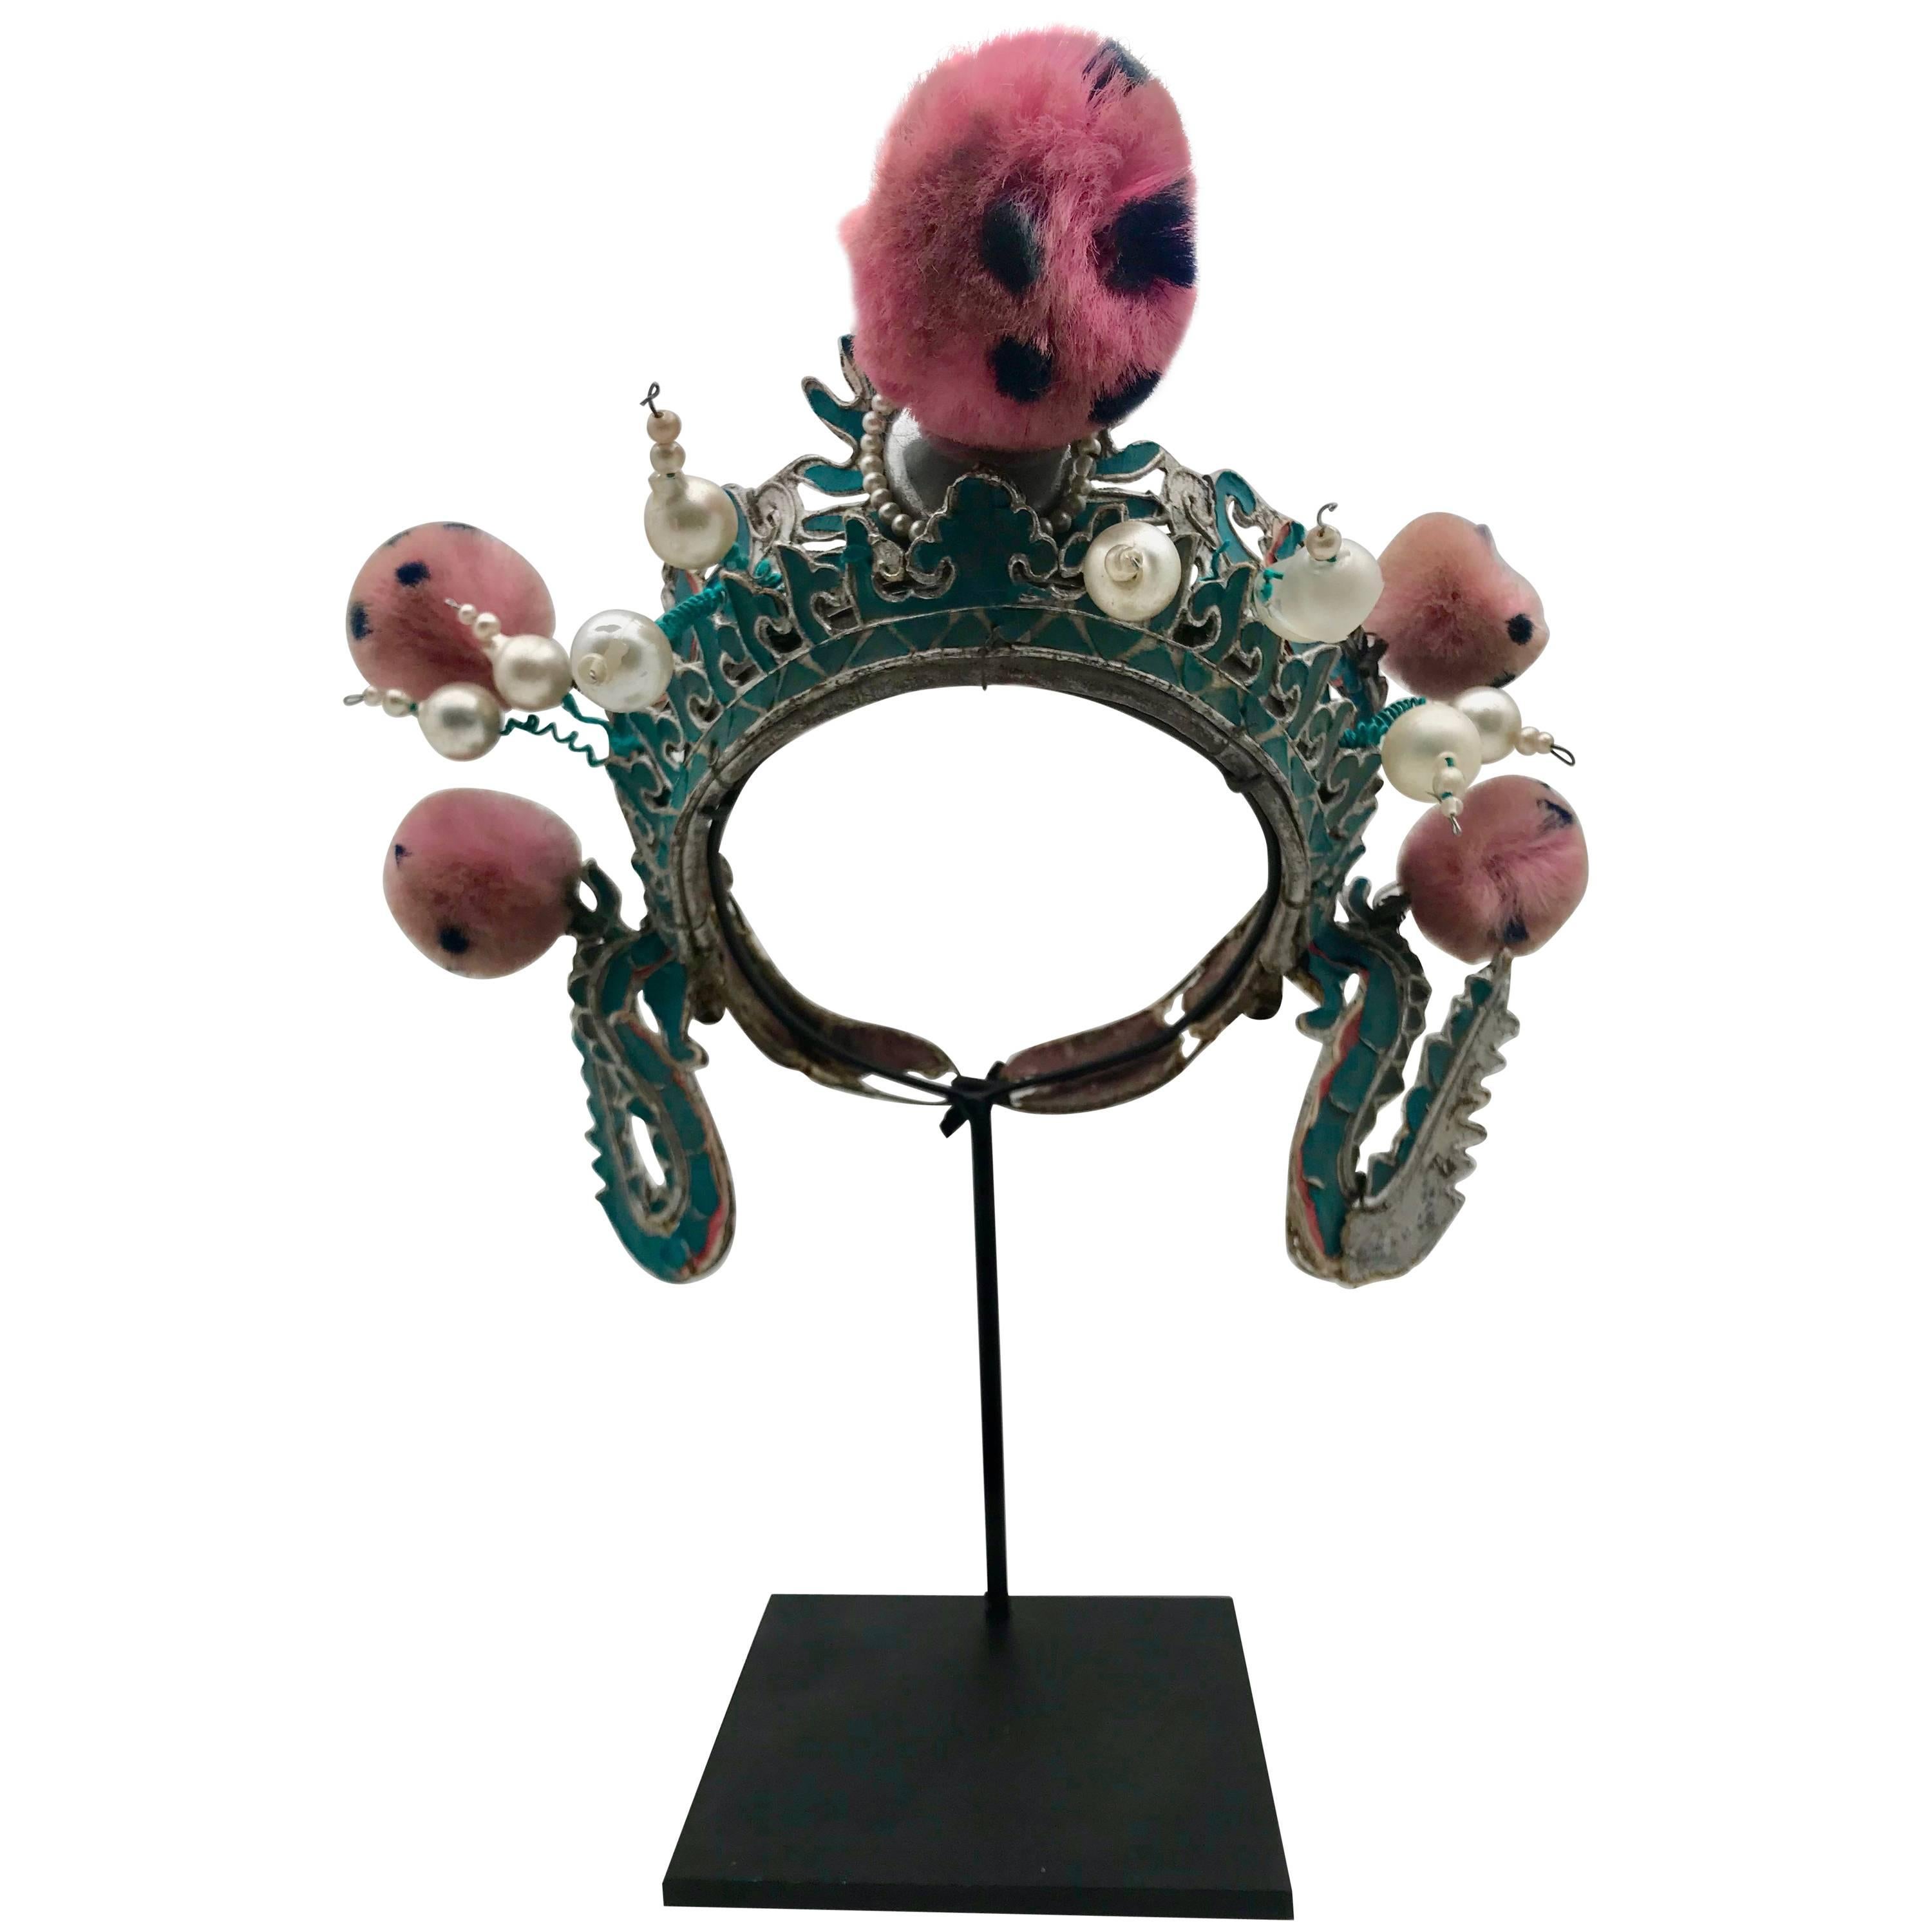 Vintage Silver and Turquoise Chinese Opera Theatre Headdress Pink/Blue Pom Poms